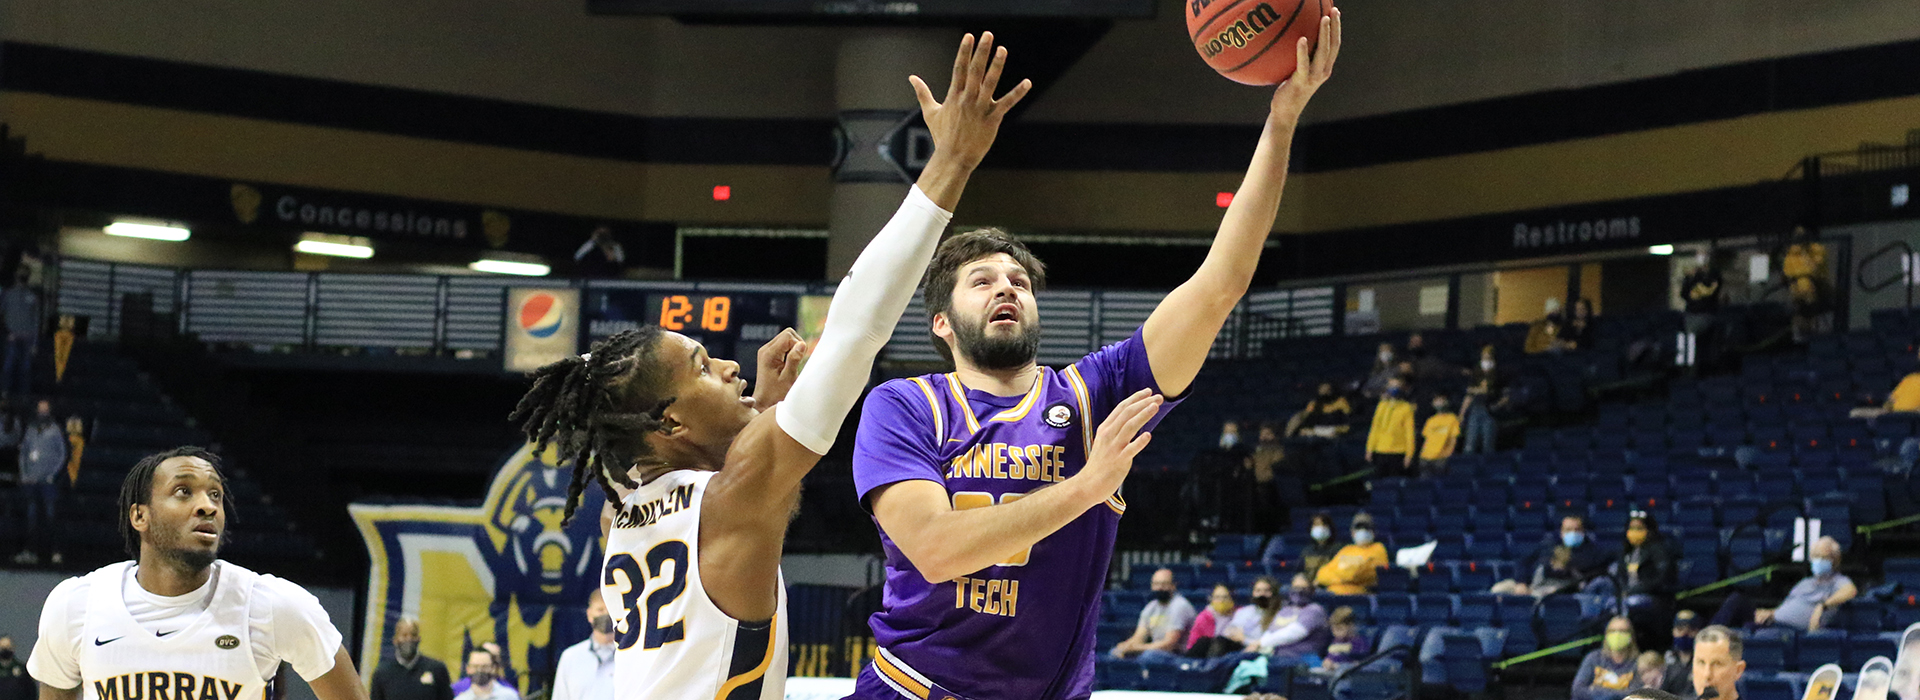 Sluggish start too much for Tech to overcome in loss at Murray State